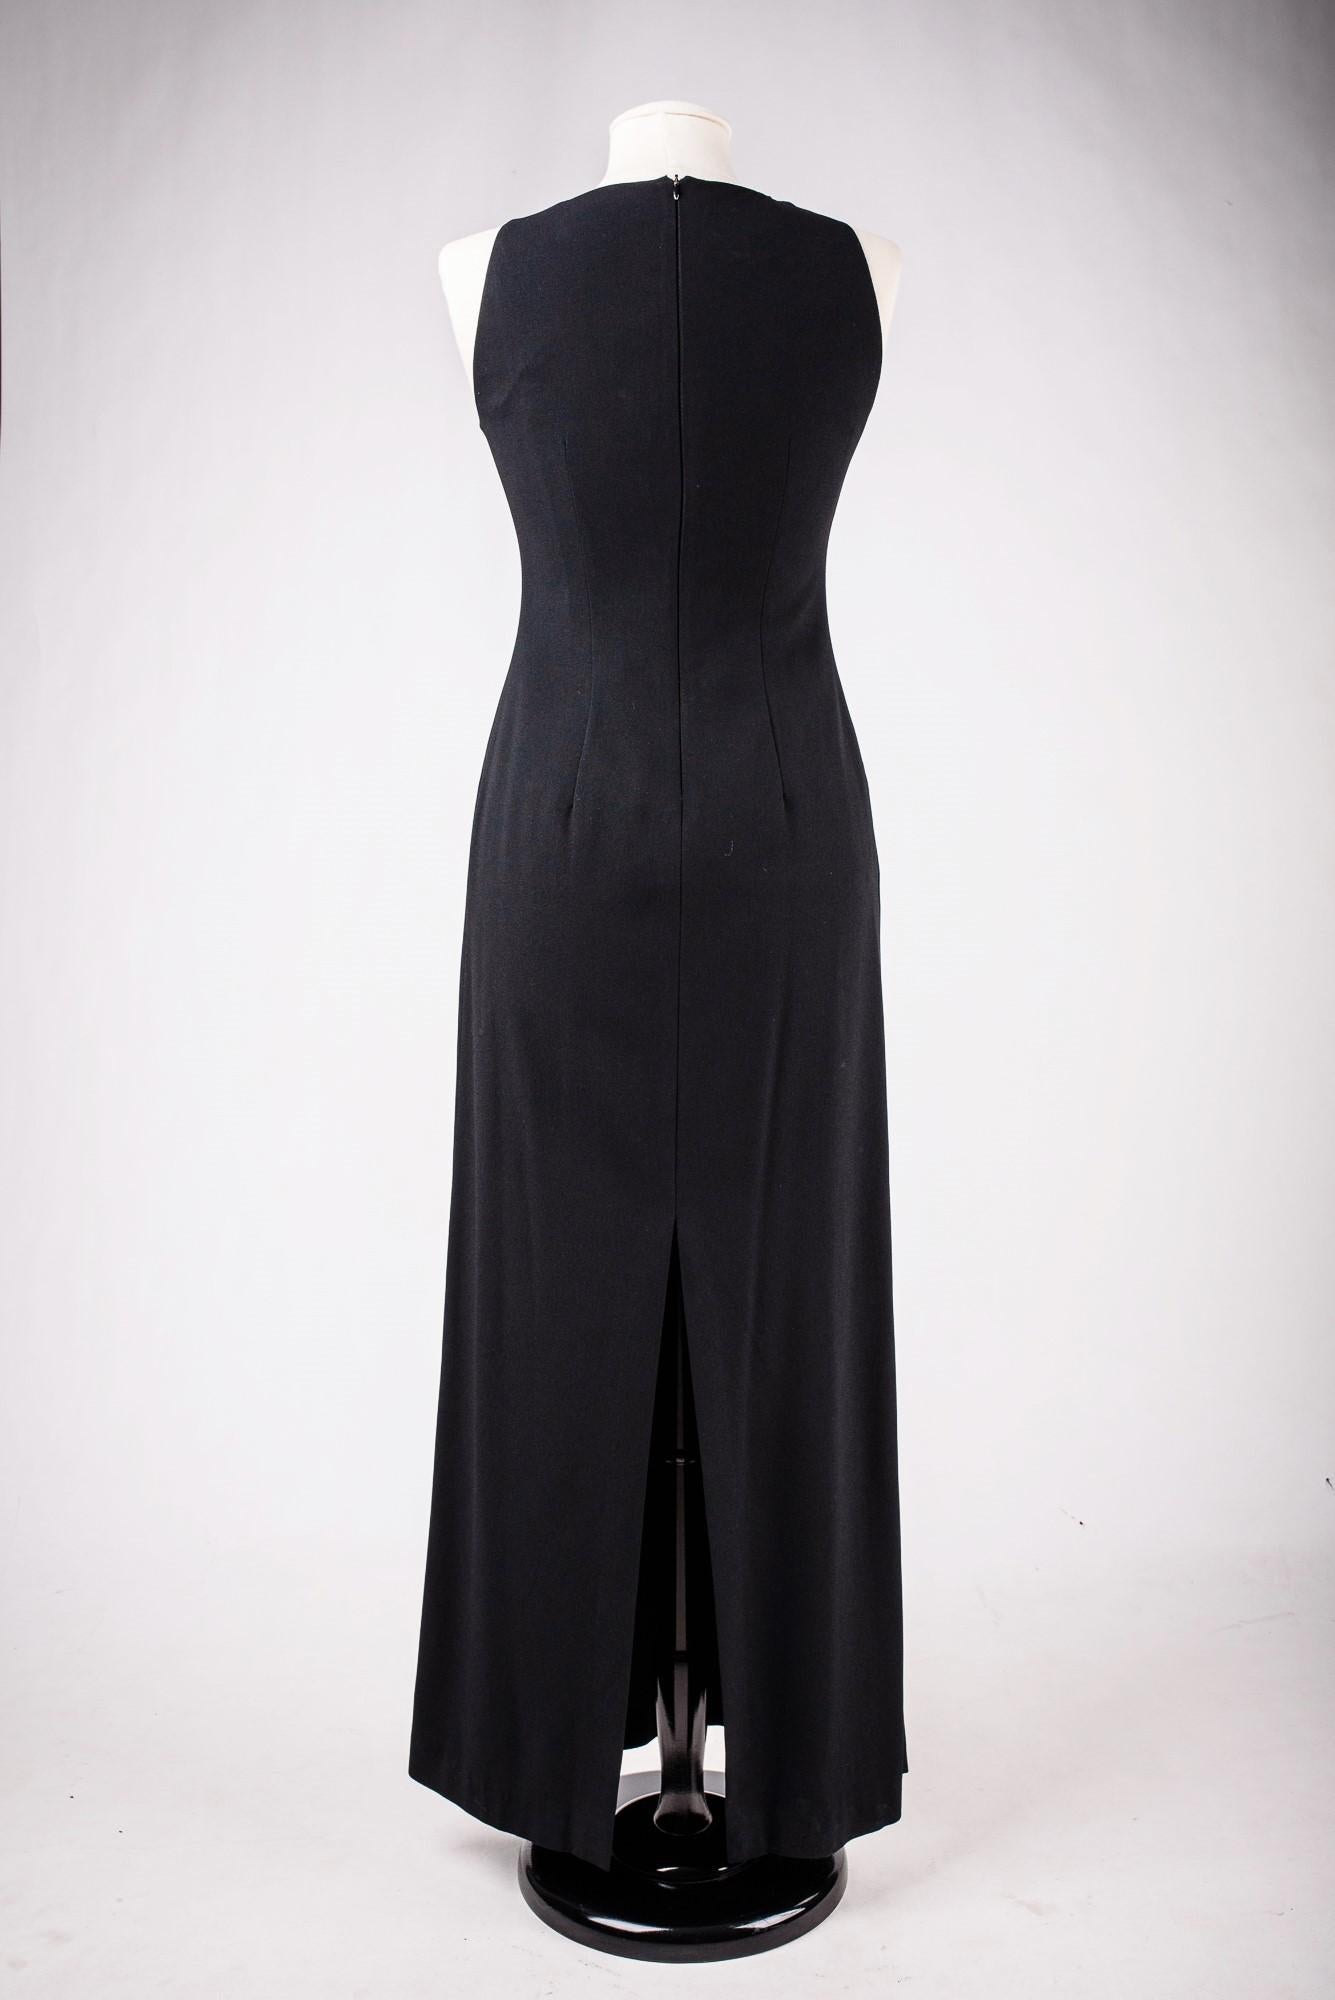 A Long Evening Black Dress by Claude Montana - French Circa 1999 For Sale 7